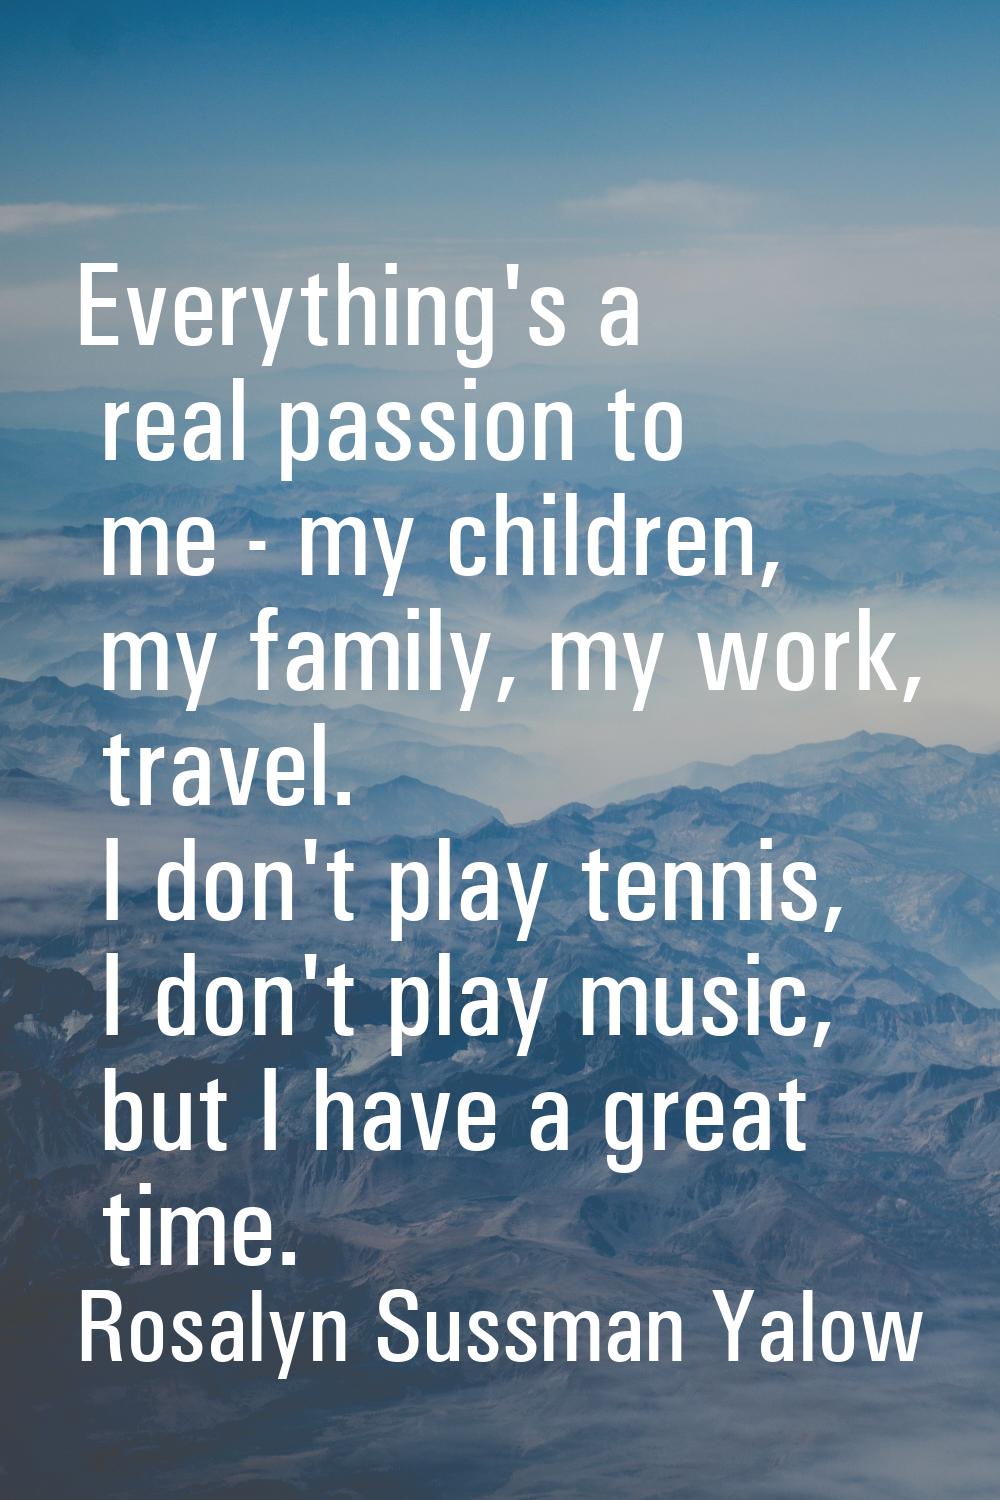 Everything's a real passion to me - my children, my family, my work, travel. I don't play tennis, I